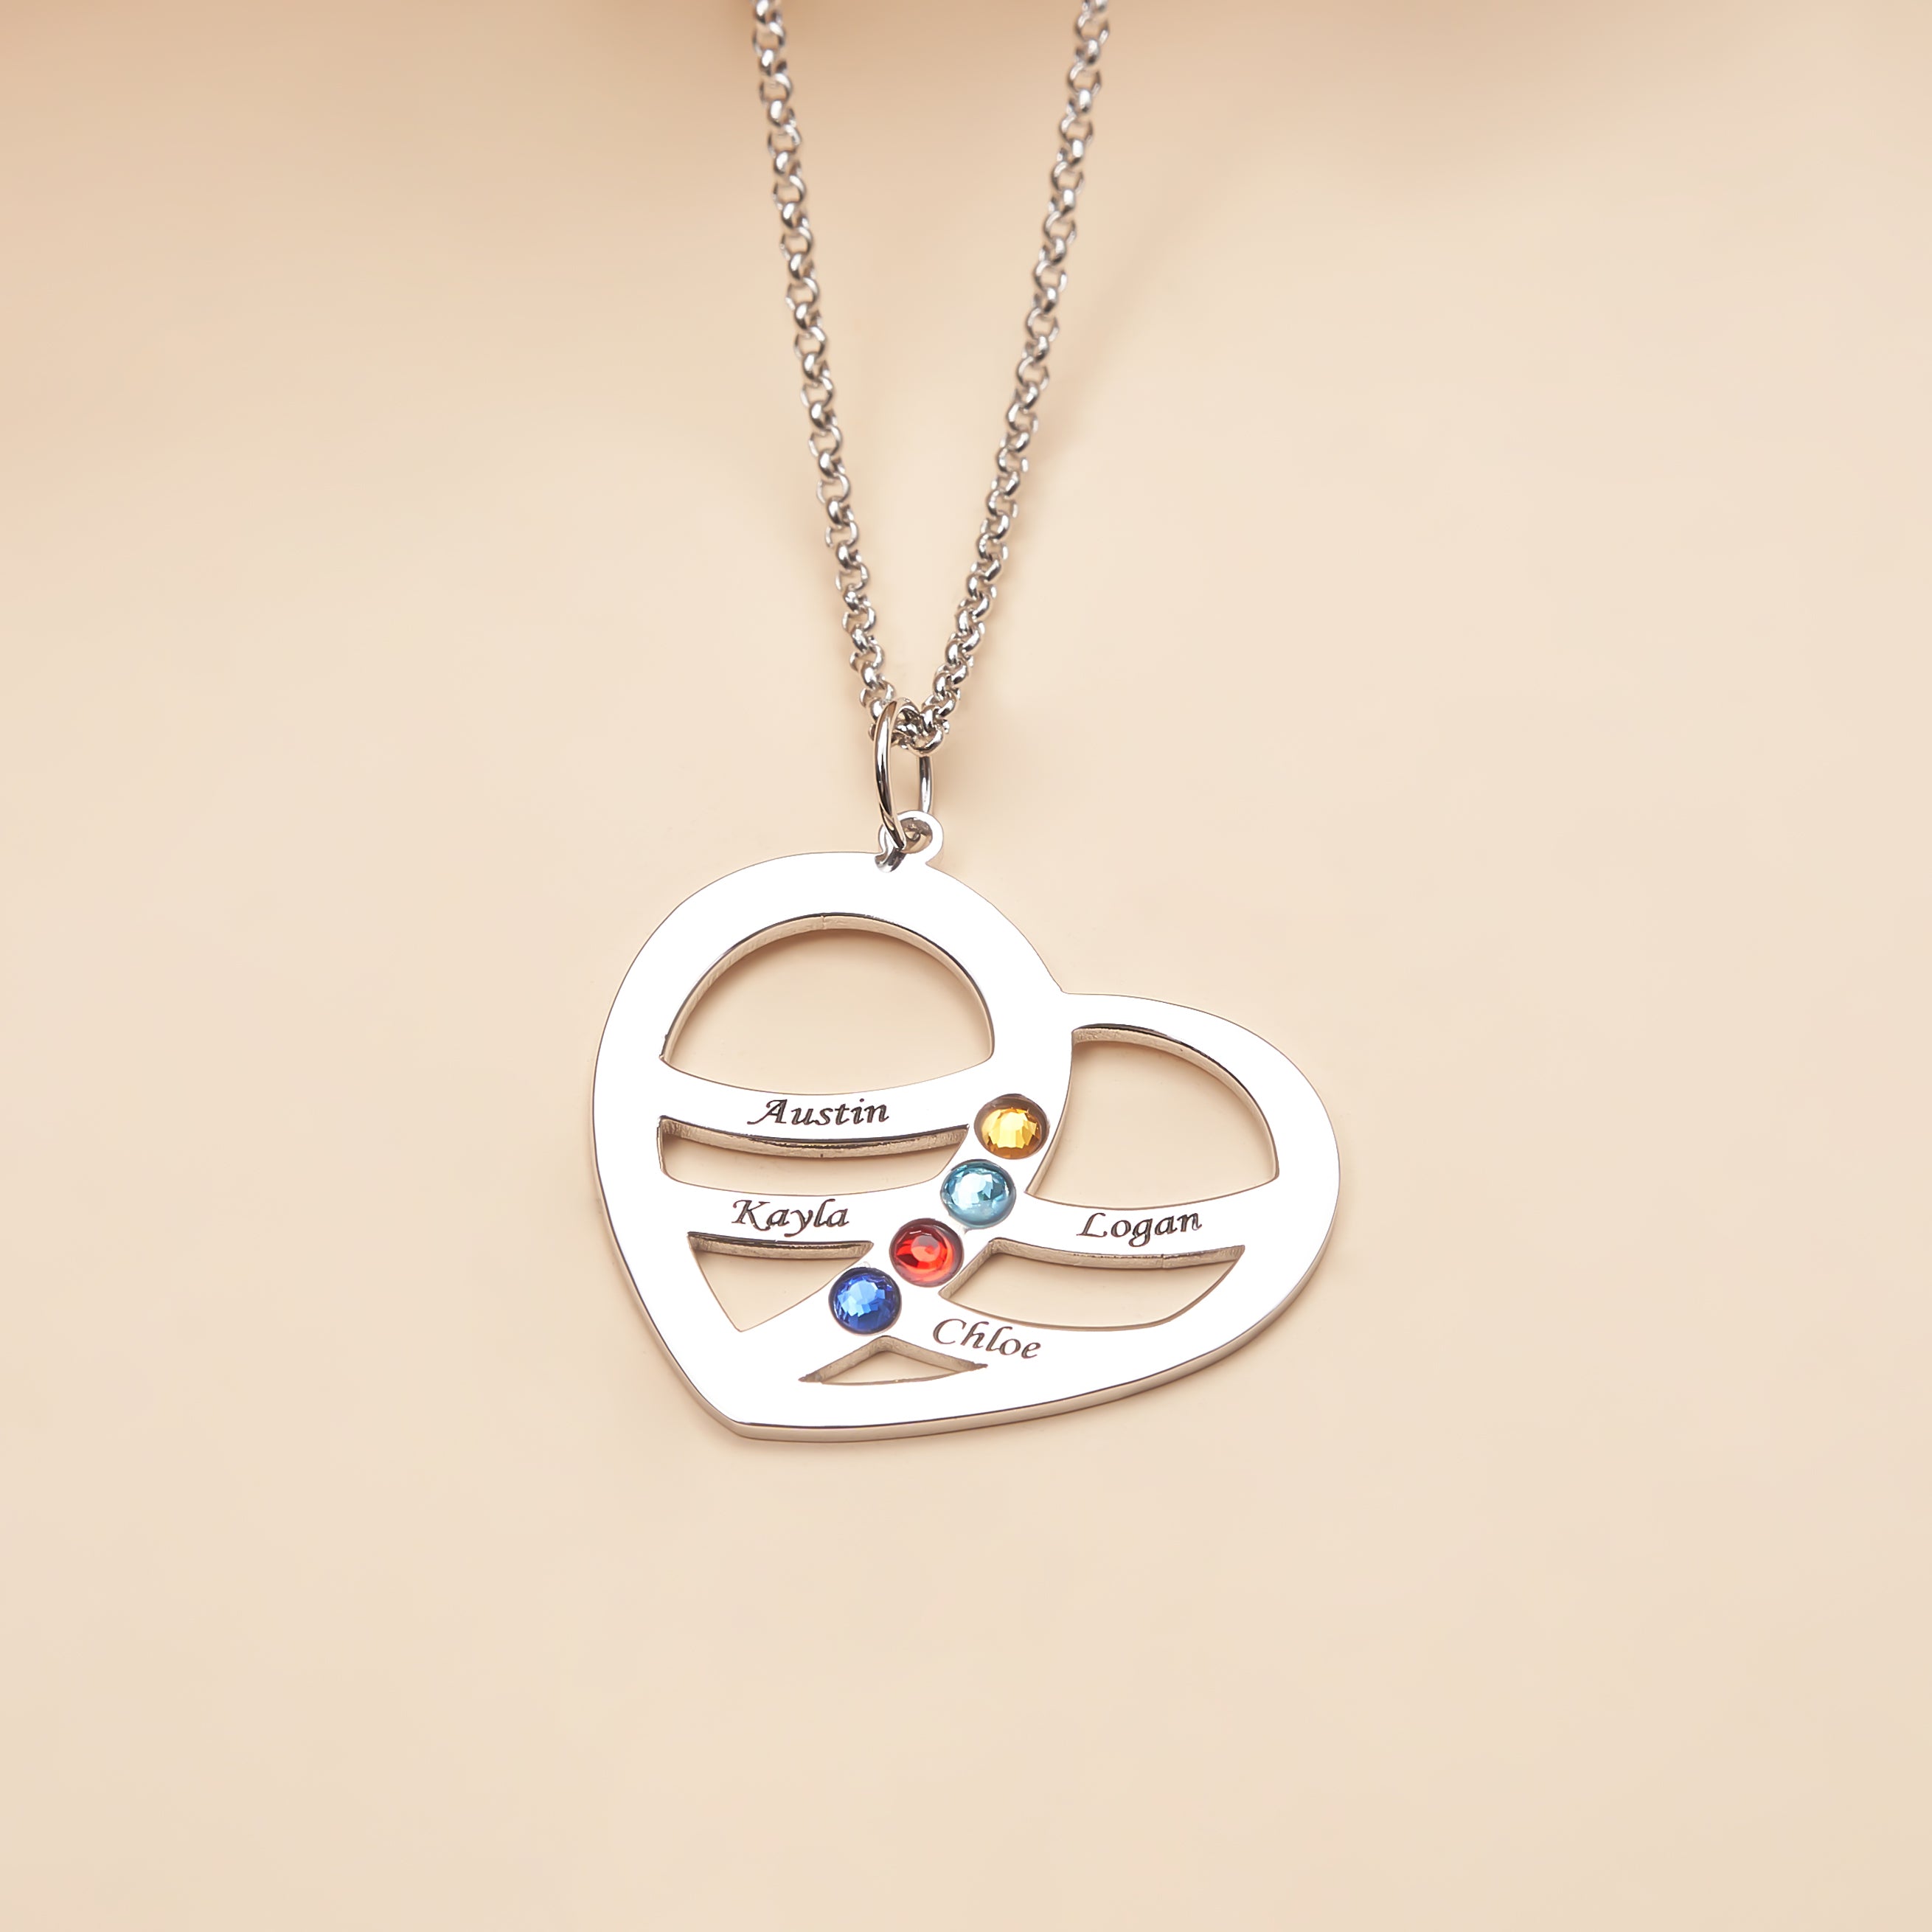 Personalized Heart shaped Four Name Necklace